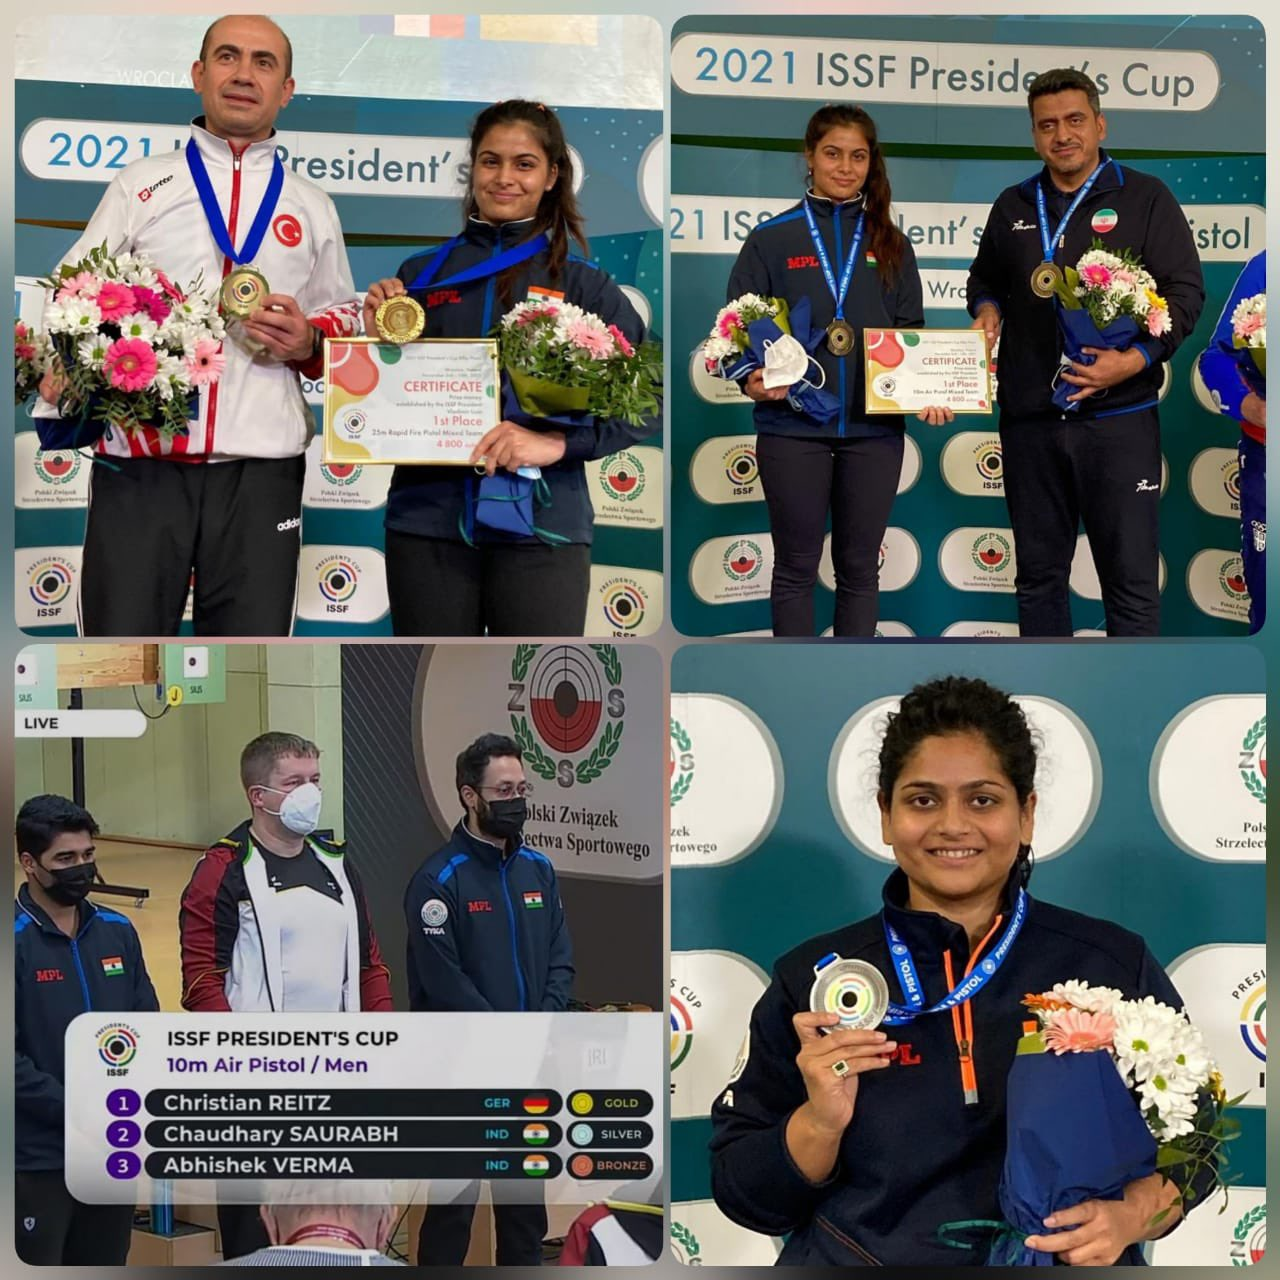 PM Modi congratulates Indian shooters on winning medals at ISSF President's Cup